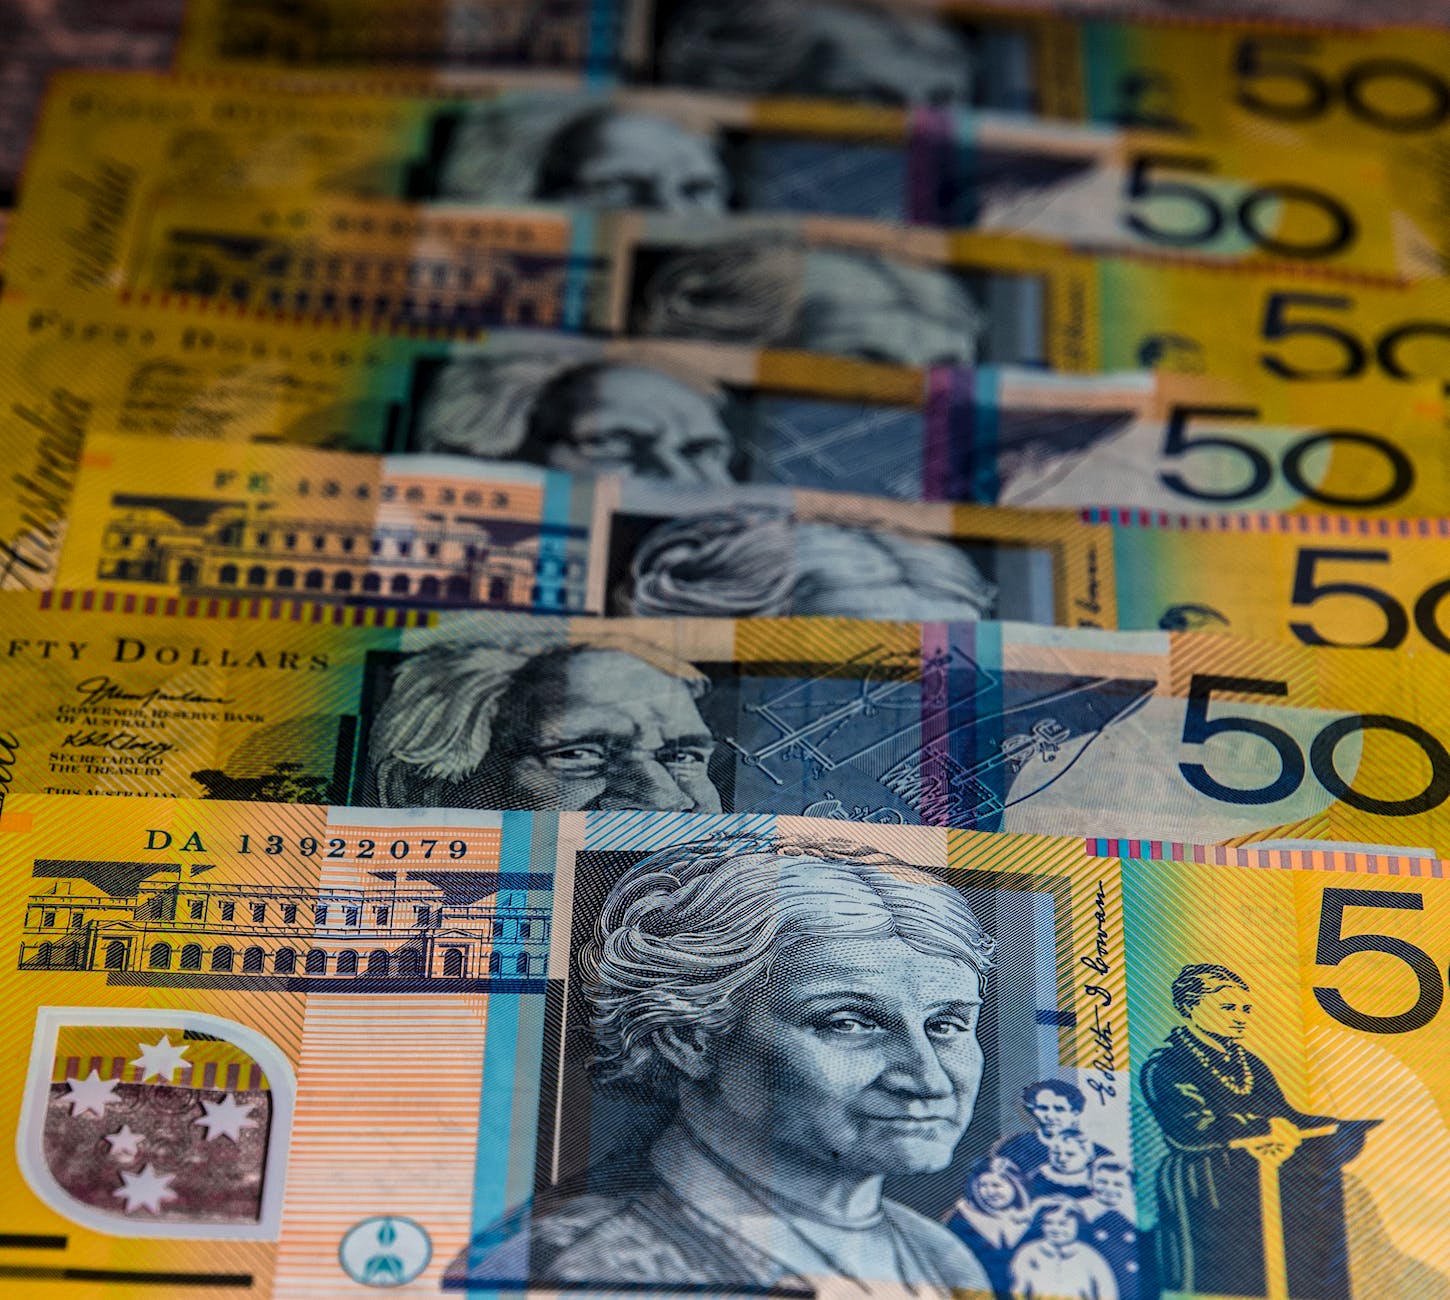 Answered: Australia has decided it will no longer feature what on its paper currency?